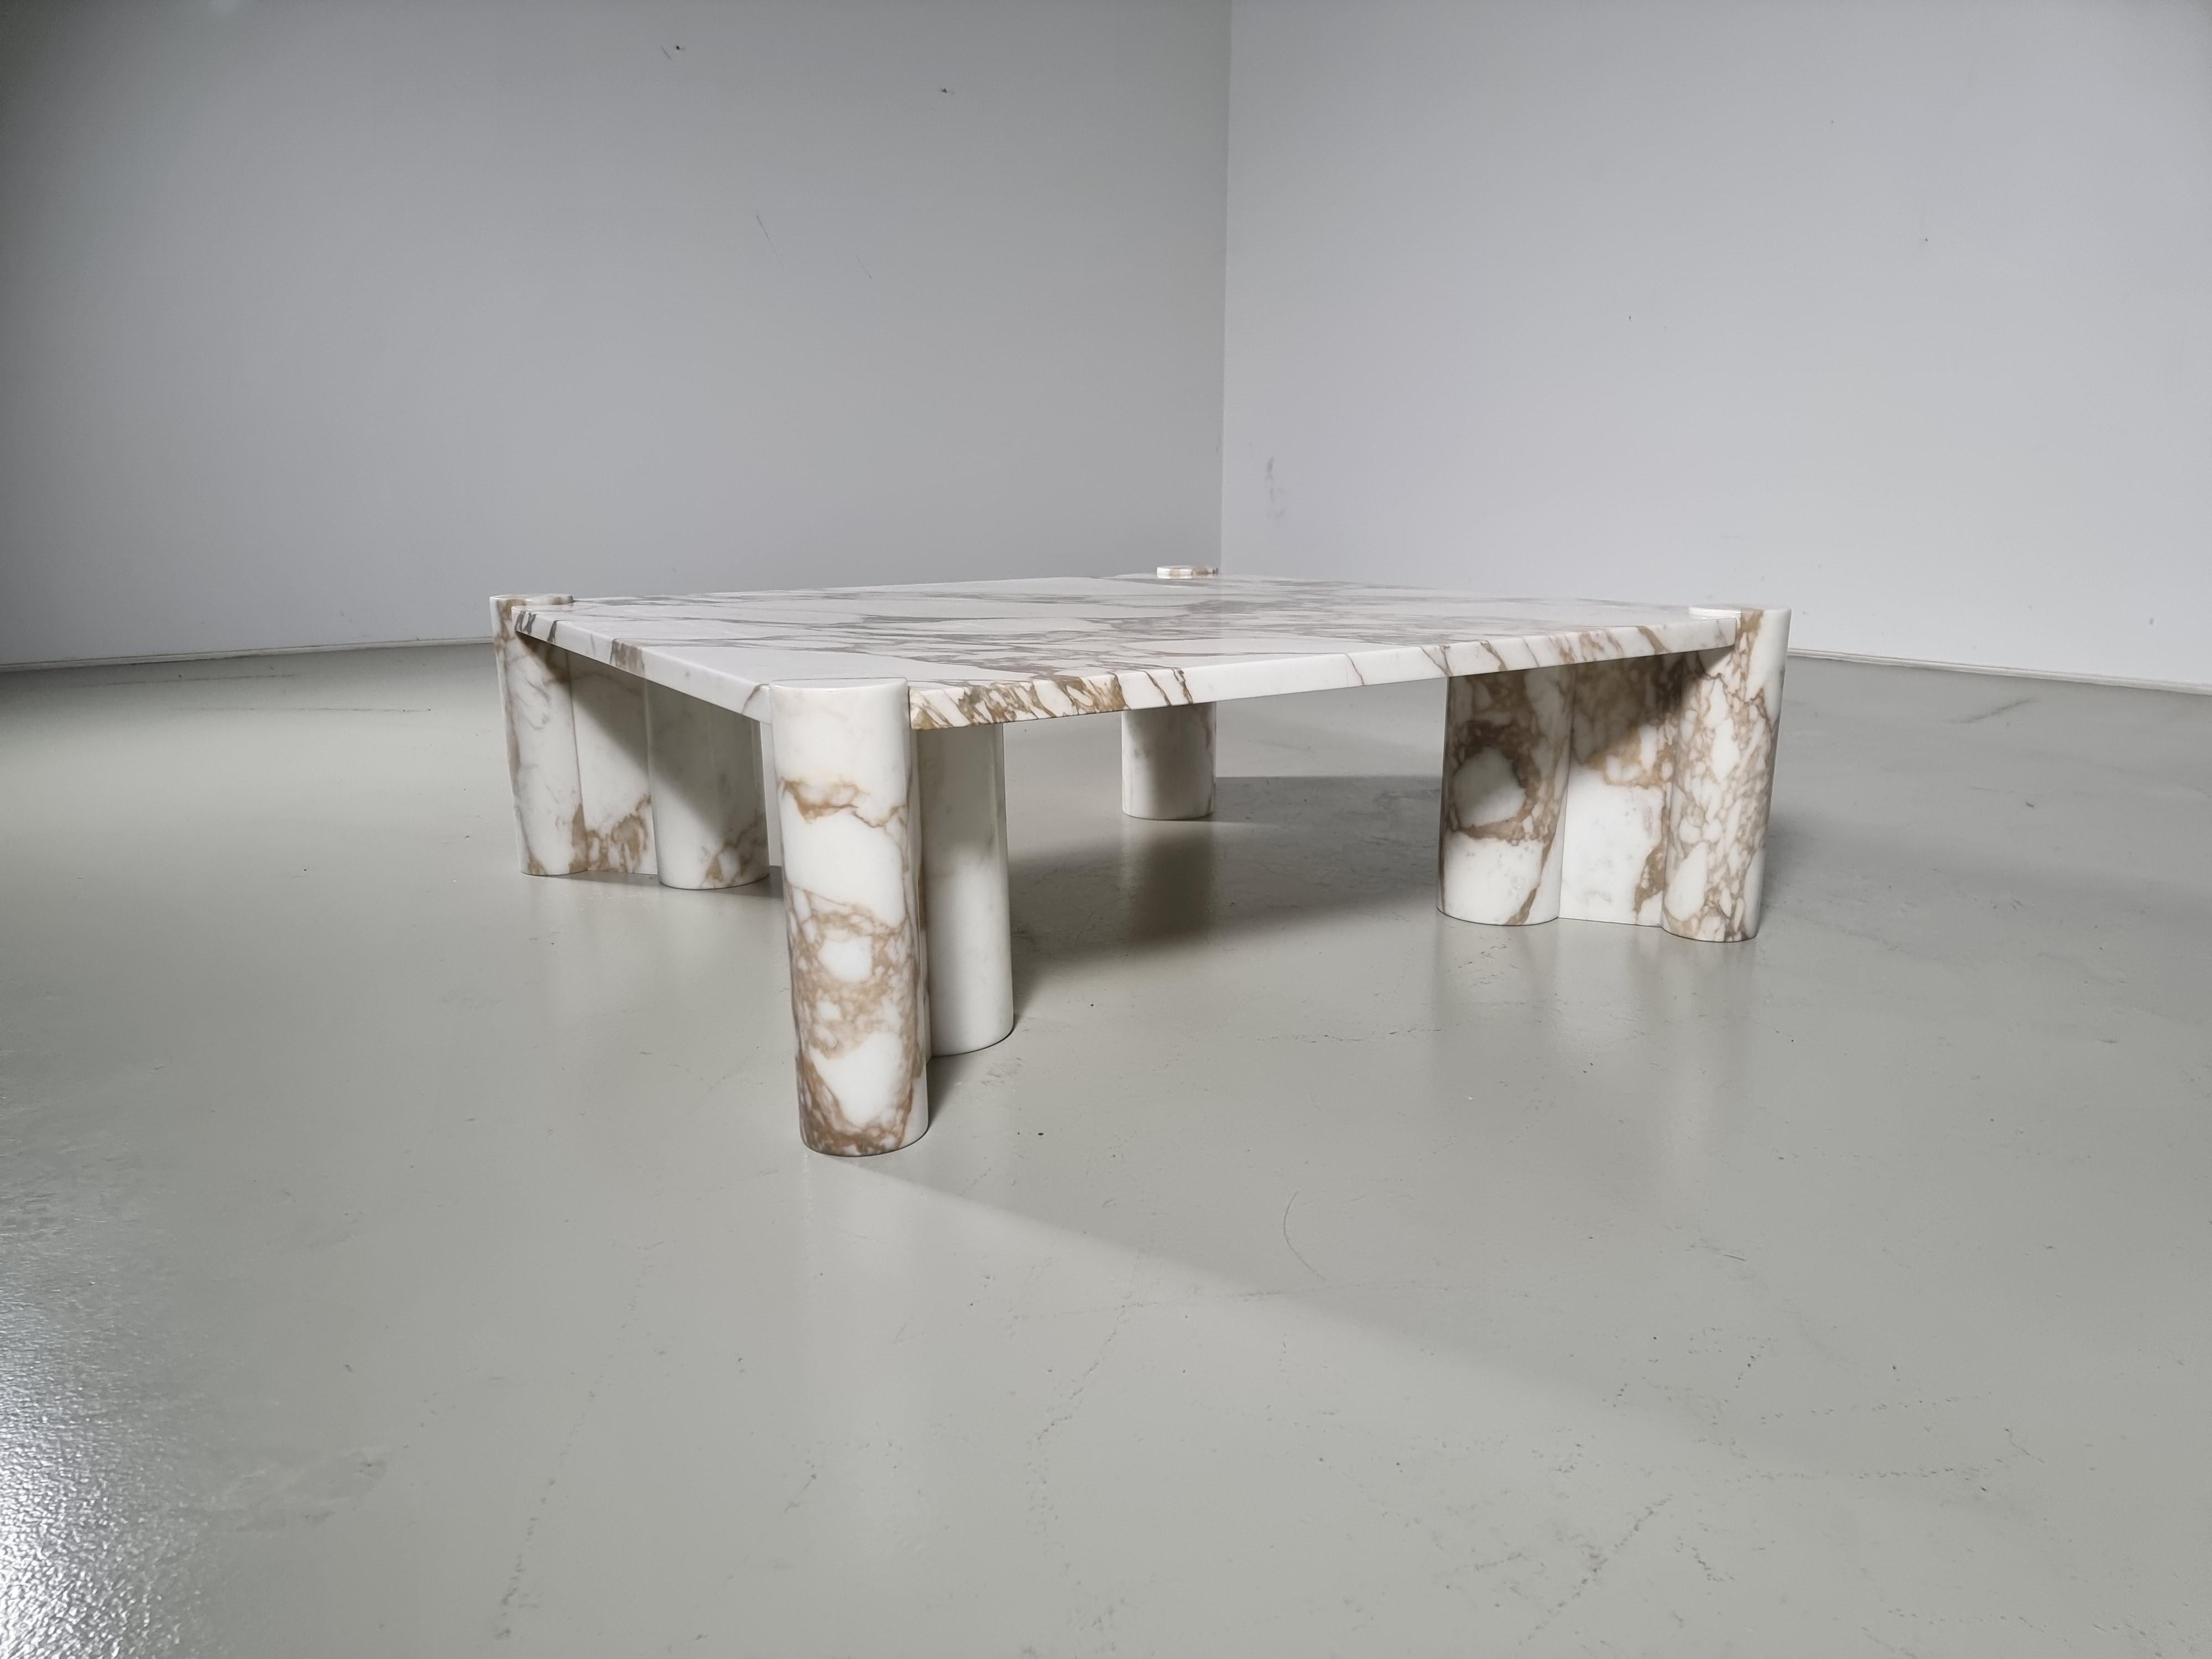 Jumbo coffee table in calacatta d'oro marble, designed by Gae Aulenti for Knoll International in the 1960s. Square tabletop with four cylindrical cluster legs. The marble is in beautiful condition and has de most amazing color. The marble features